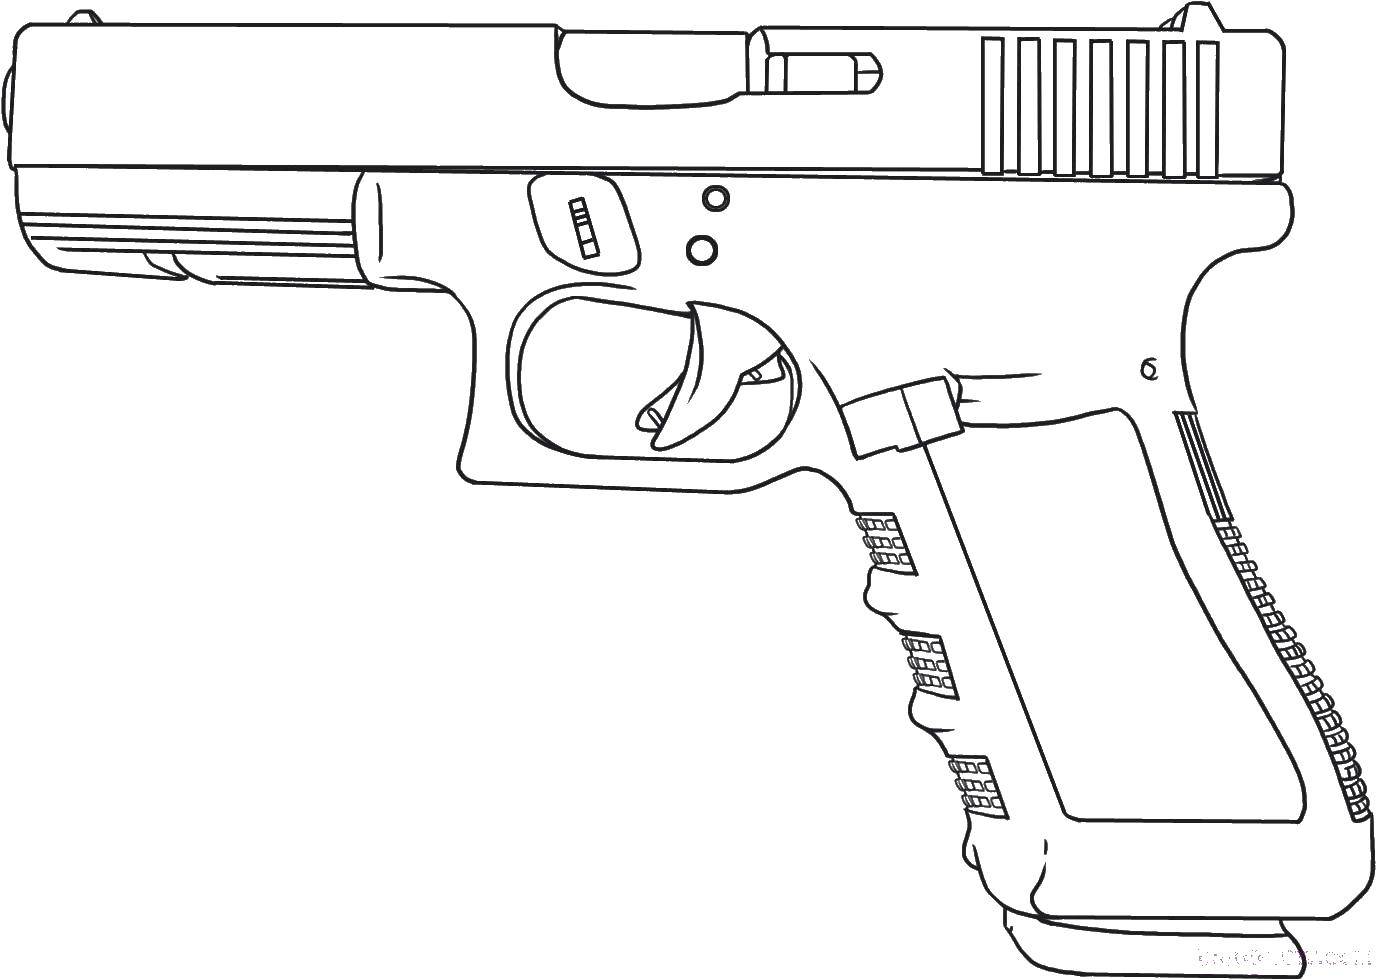 Coloring Gun.. Category weapons. Tags:  Weapons.